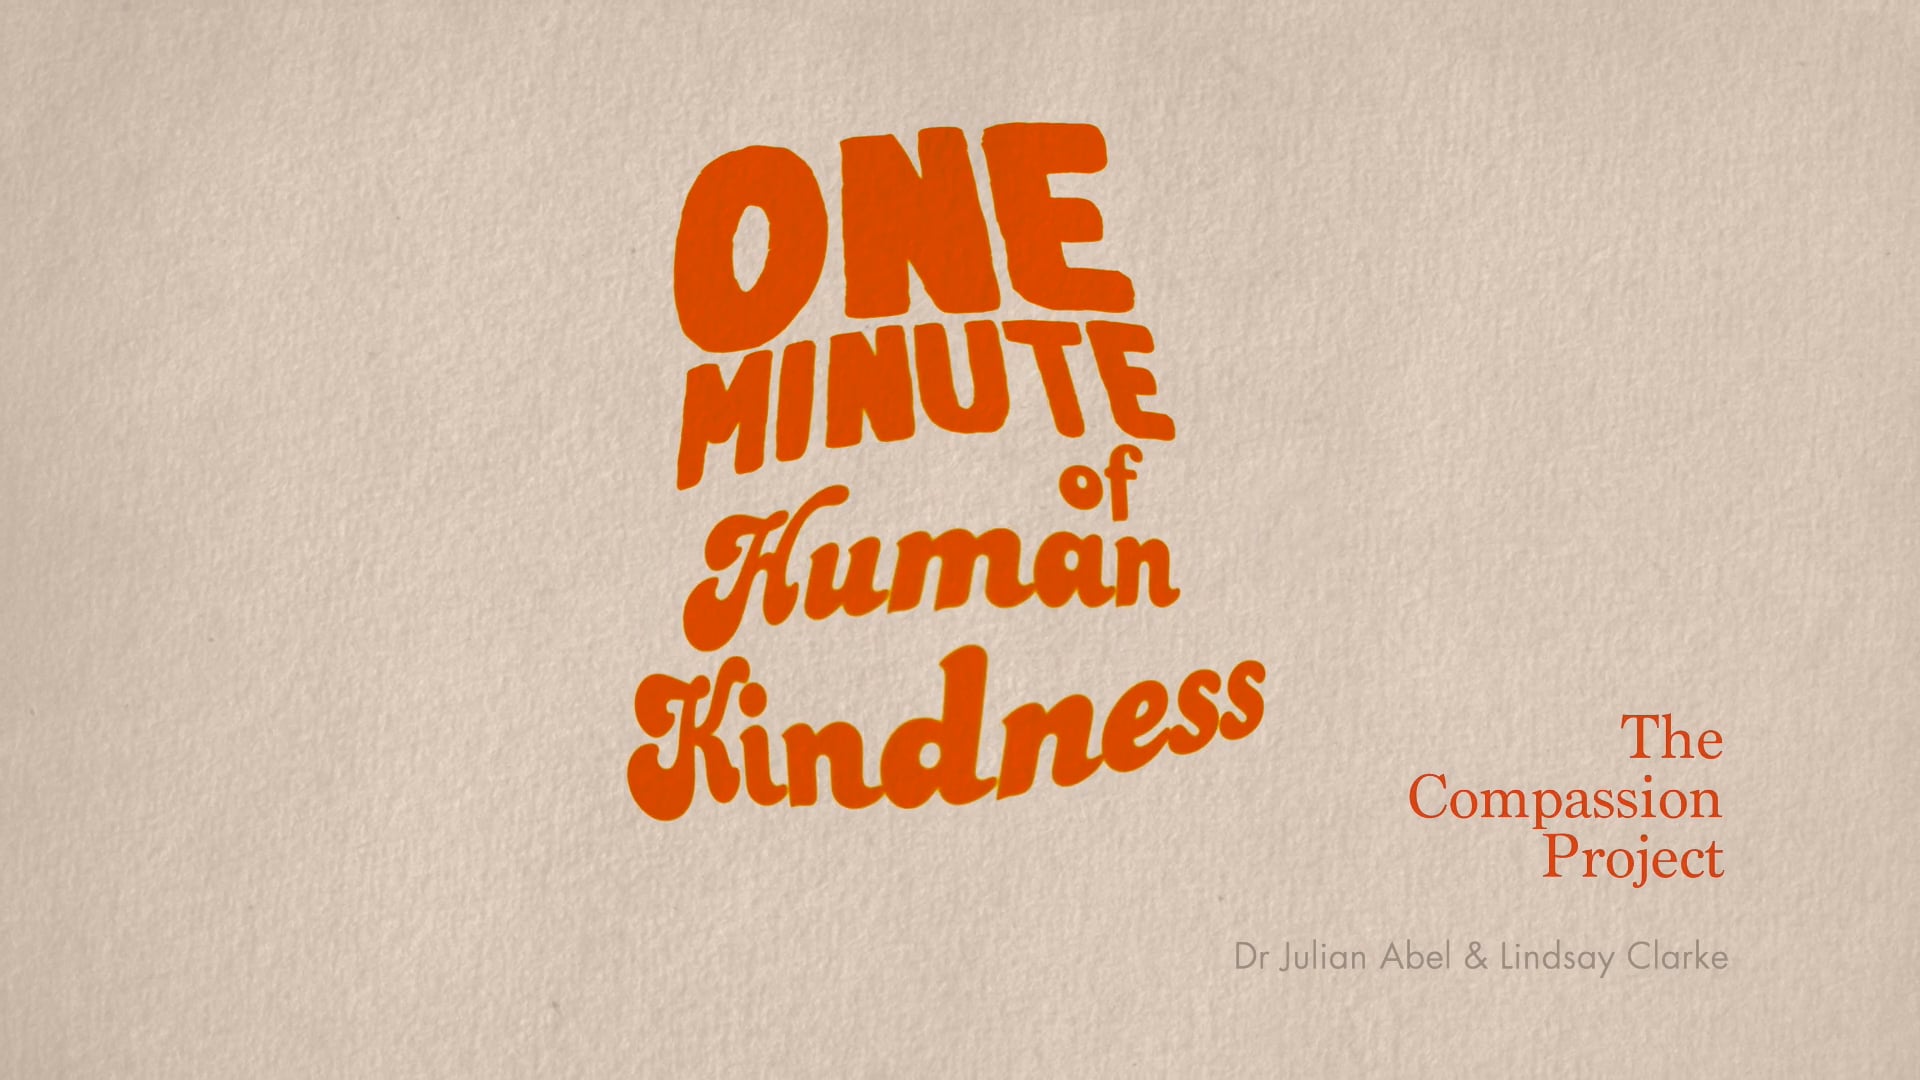 The Compassion Project: One Minute of Human Kindness [1 of 10]